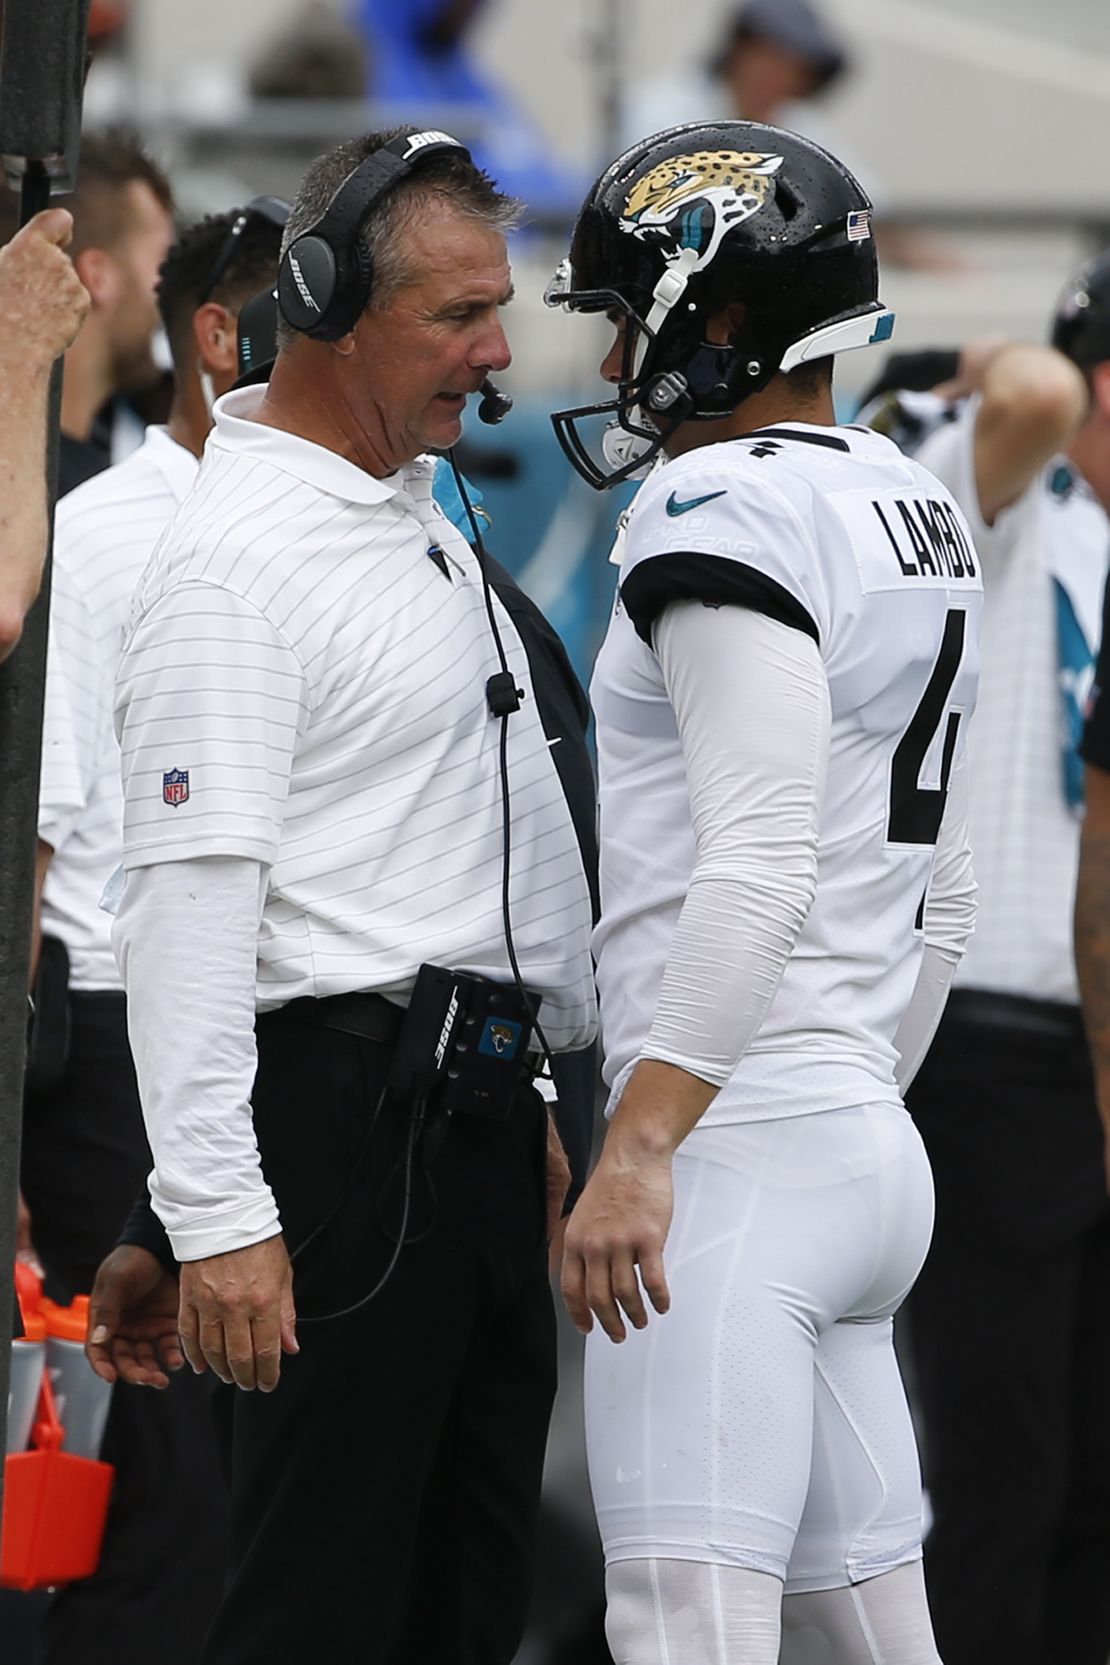 Meyer (left) talks with Lambo after the kicker missed his second field goal against the Denver Broncos during the first half on September 19, 2021.